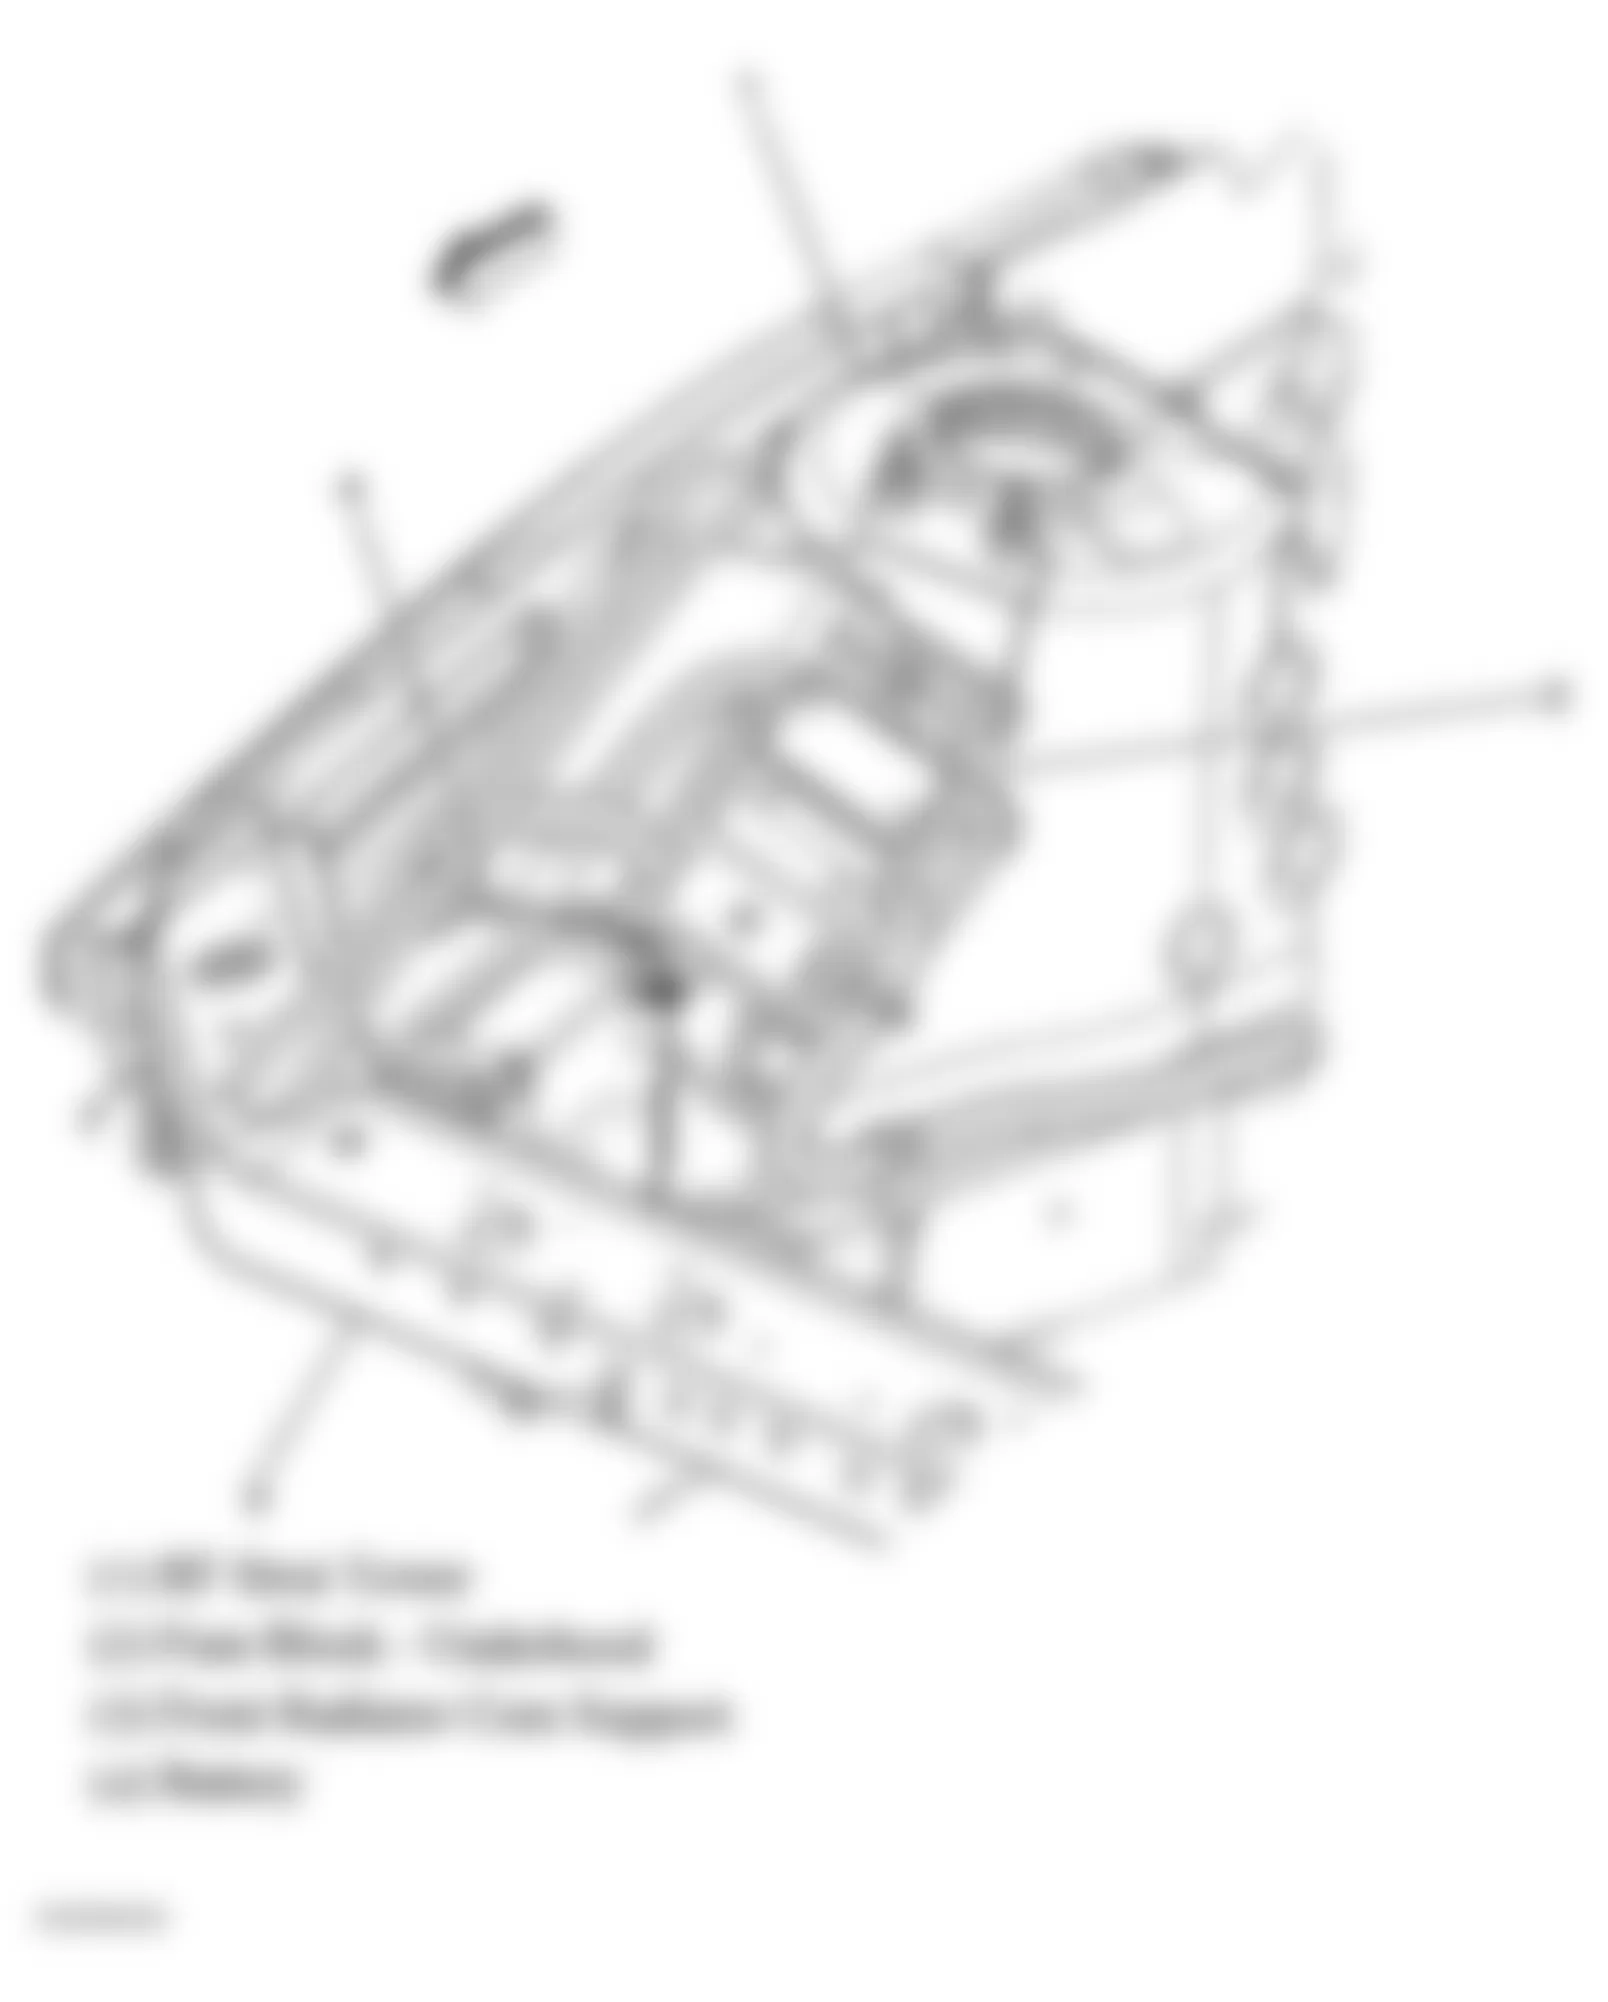 Buick Allure CX 2005 - Component Locations -  Right Front Of Engine Compartment